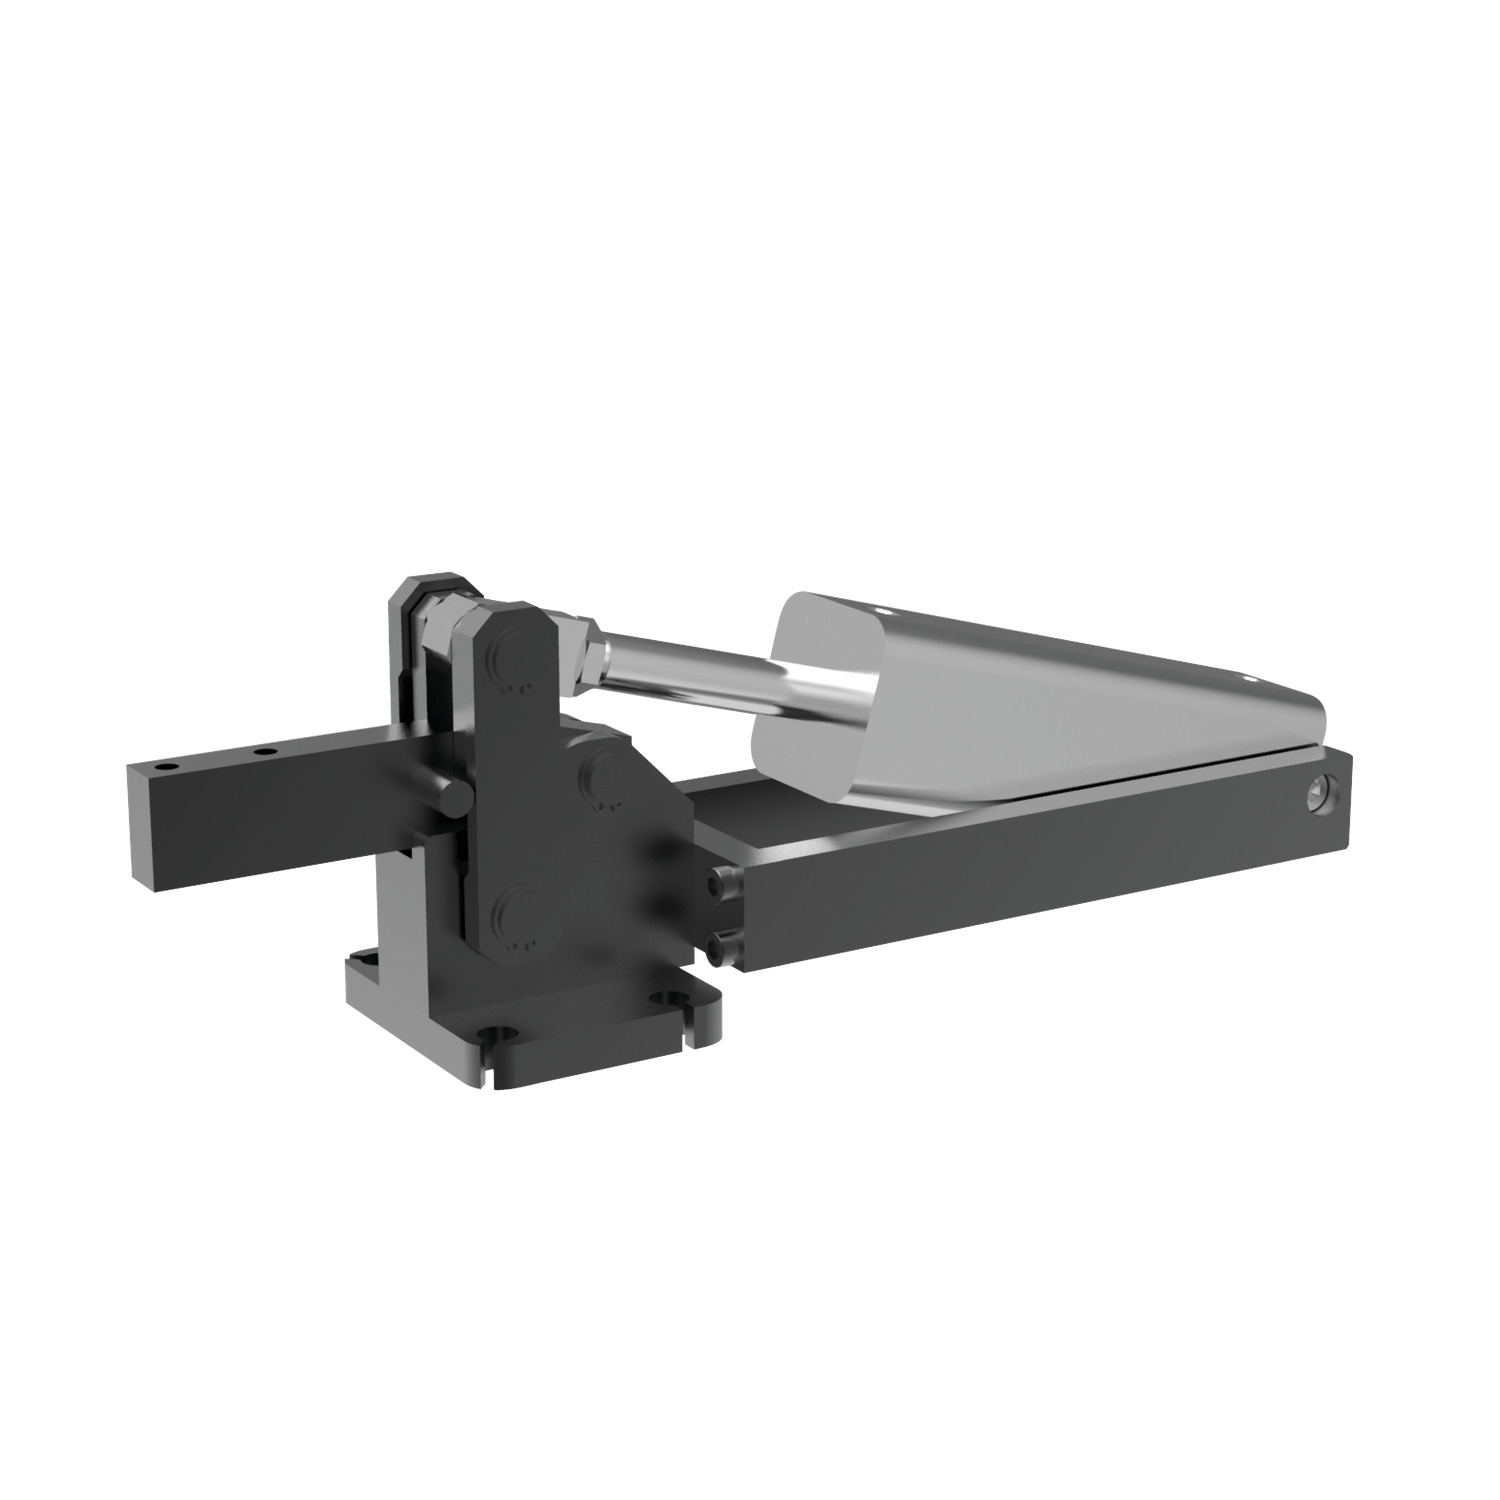 47500 Heavy Duty Pneumatic Toggle Clamps